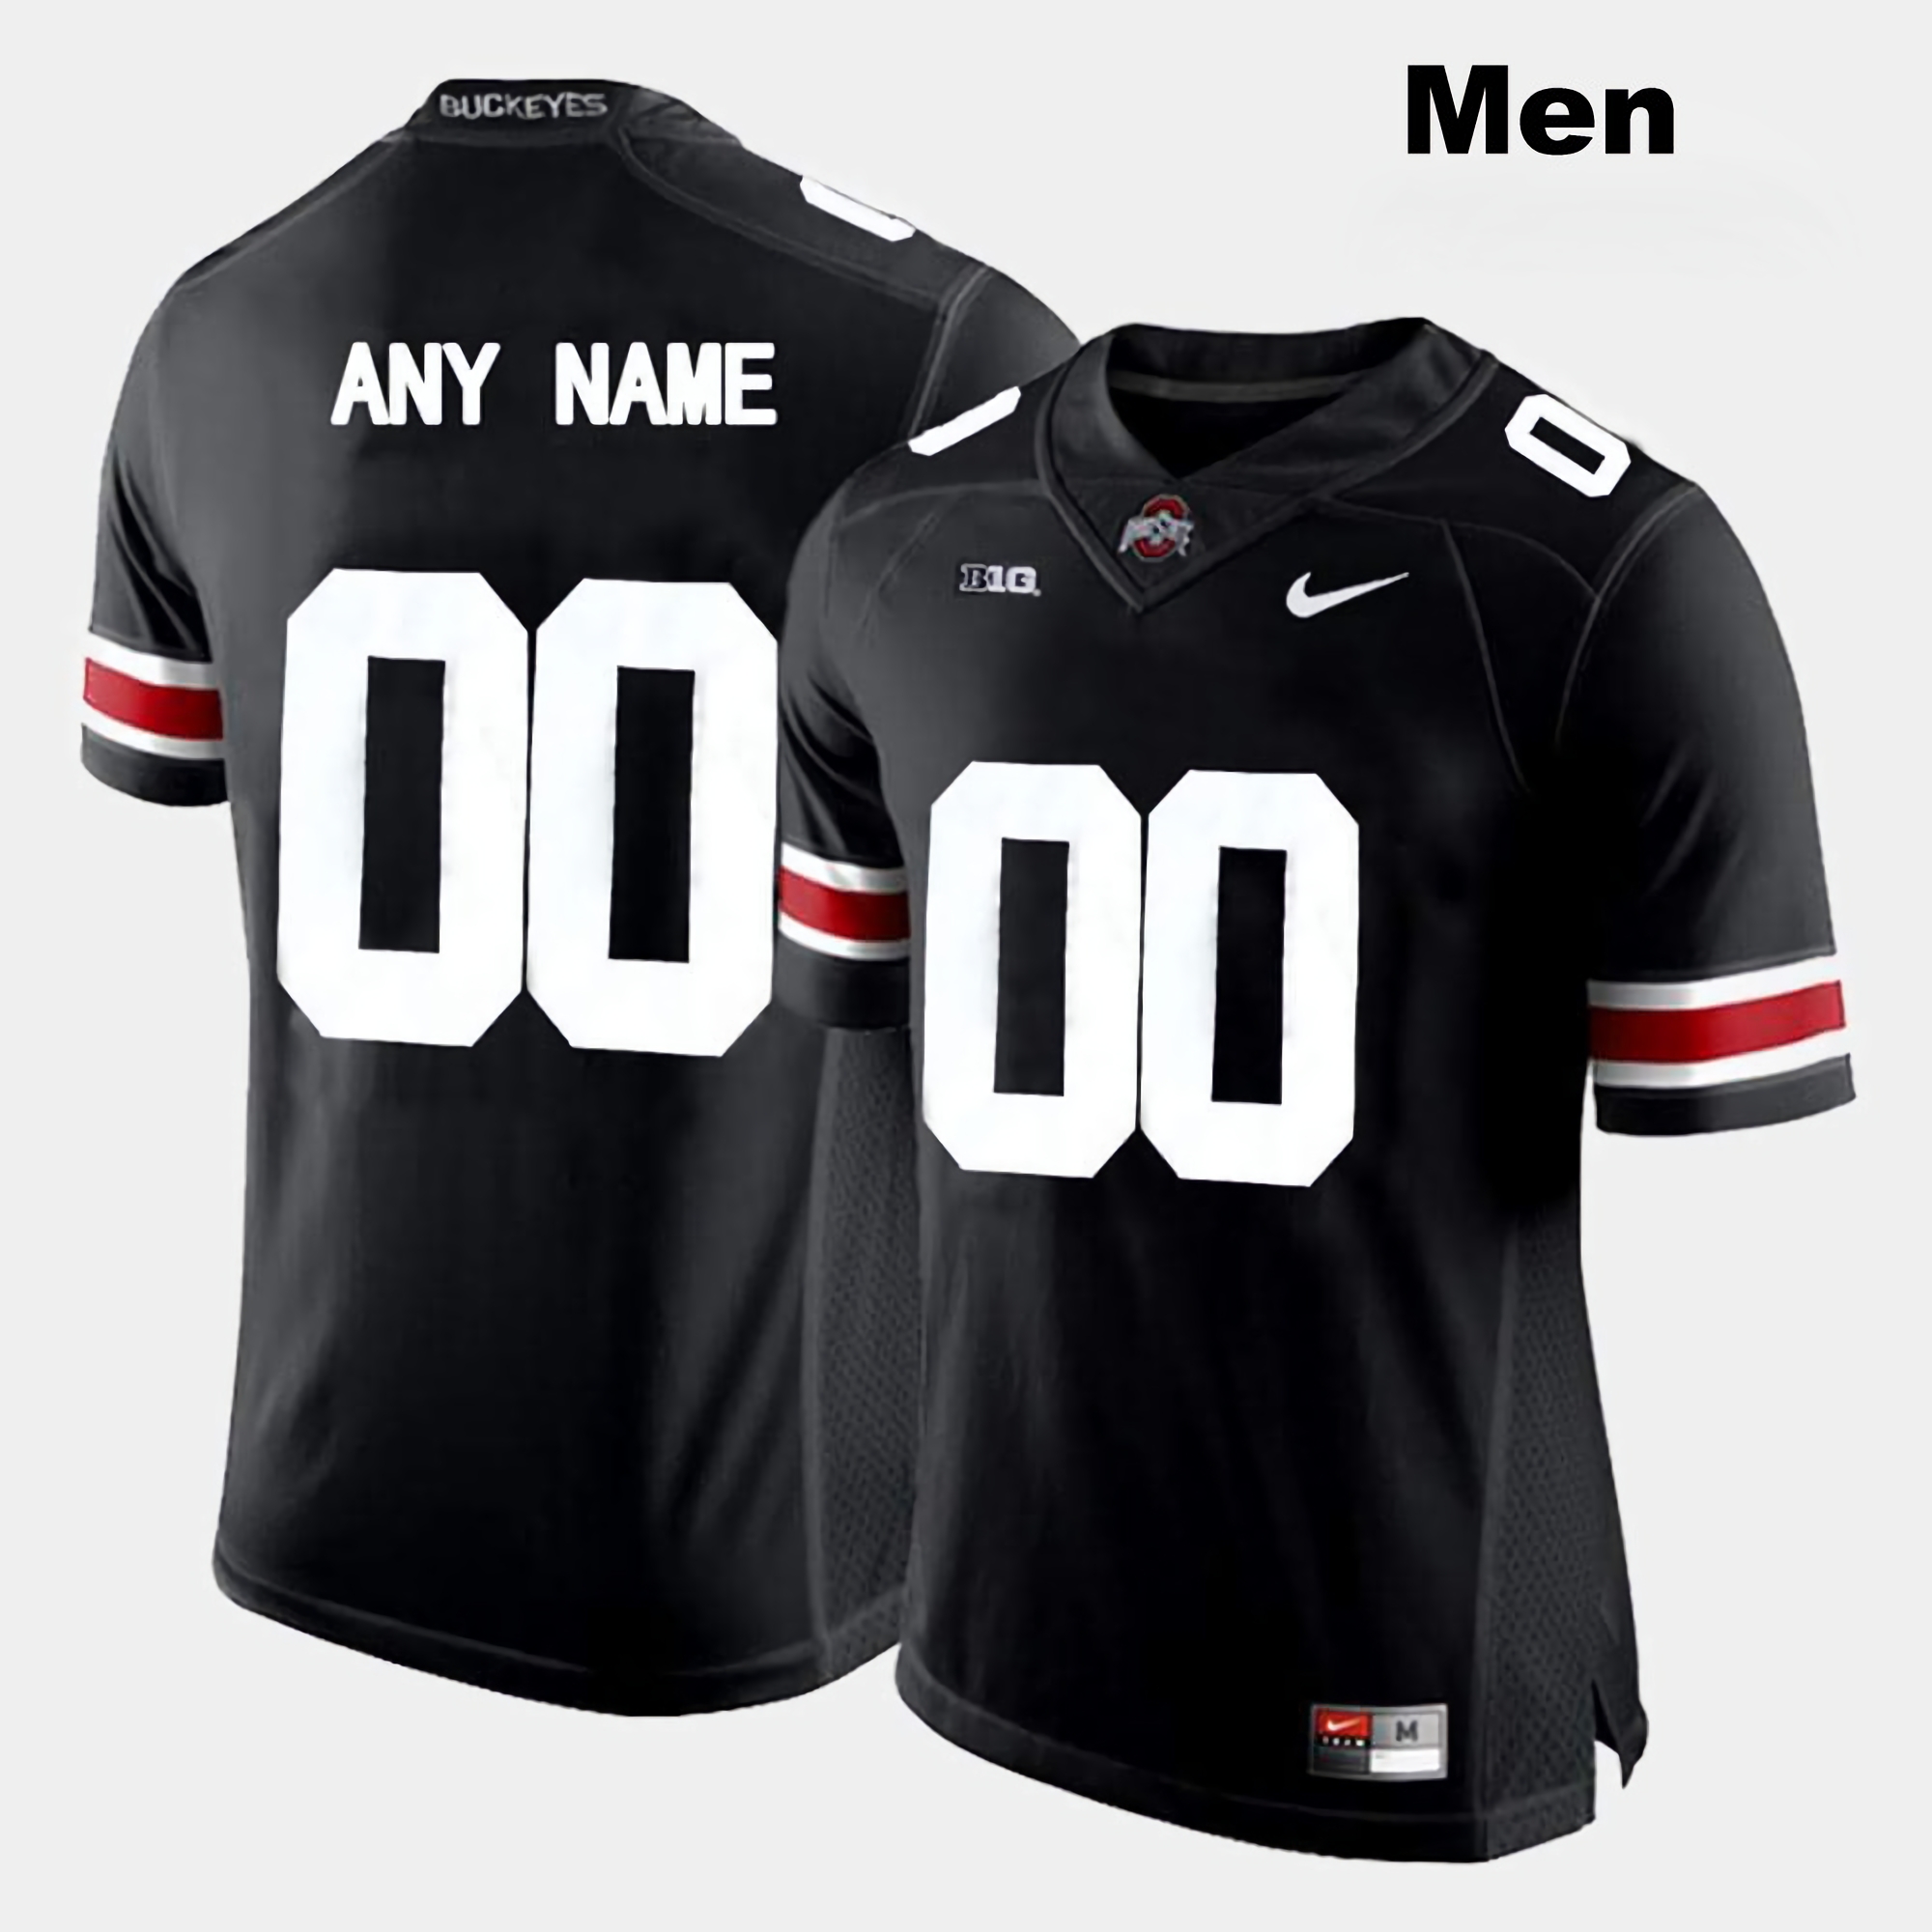 Custom Ohio State Buckeyes Men's NCAA #00 Nike Black Limited College Stitched Football Jersey NVS0556EH